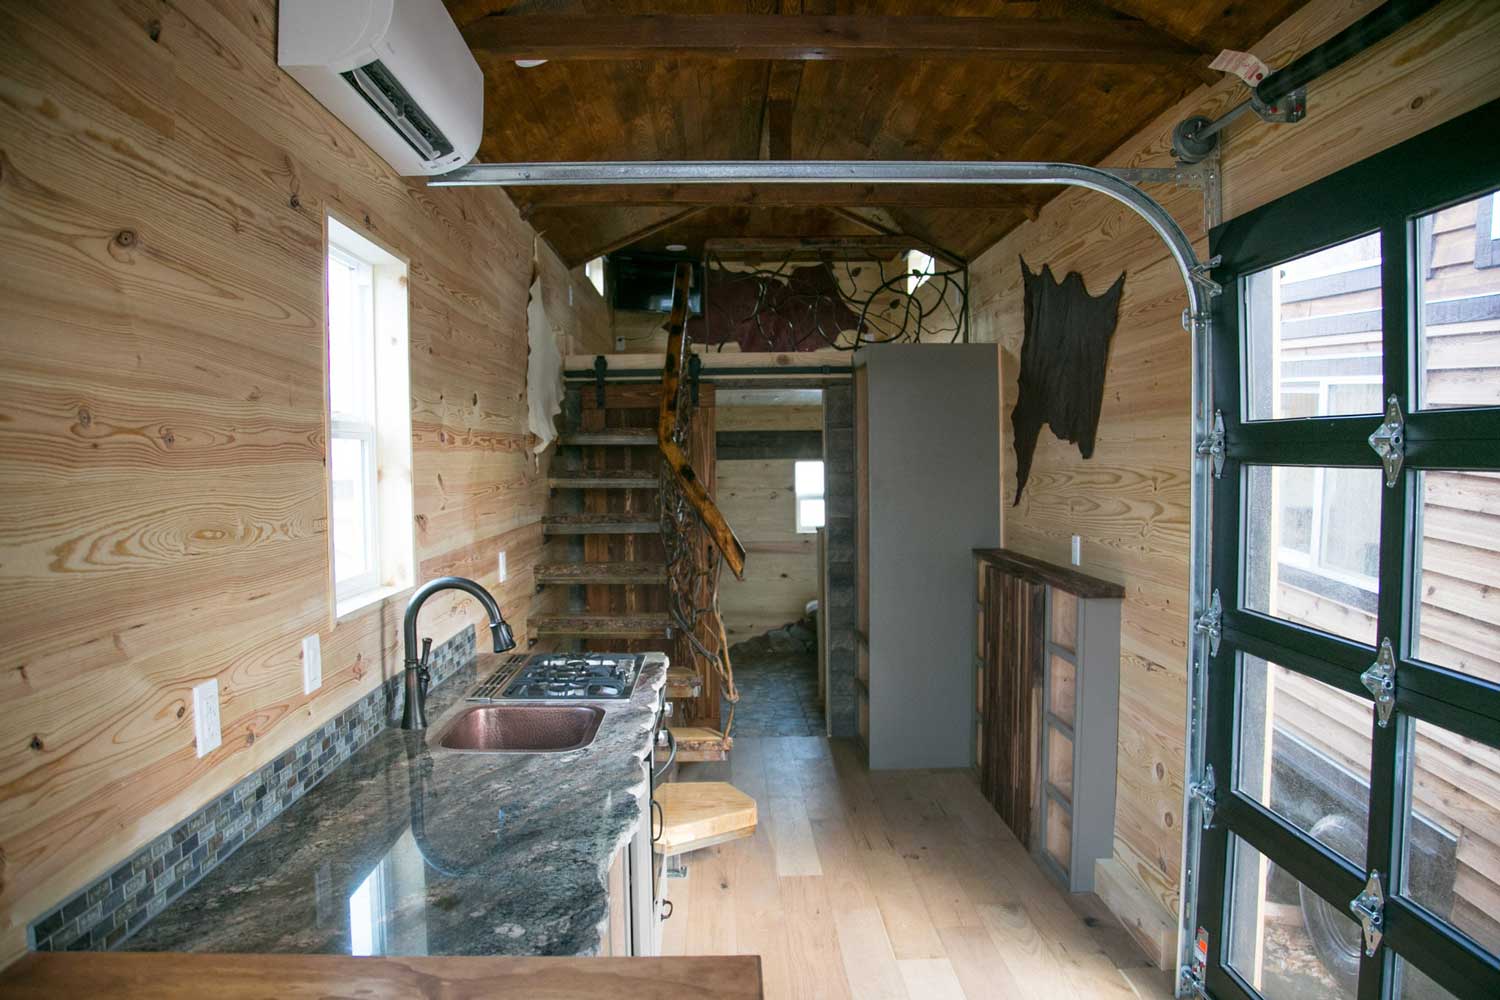 Interior of the Rustic Mountaineer custom tiny house with kitchen and stairs to loft